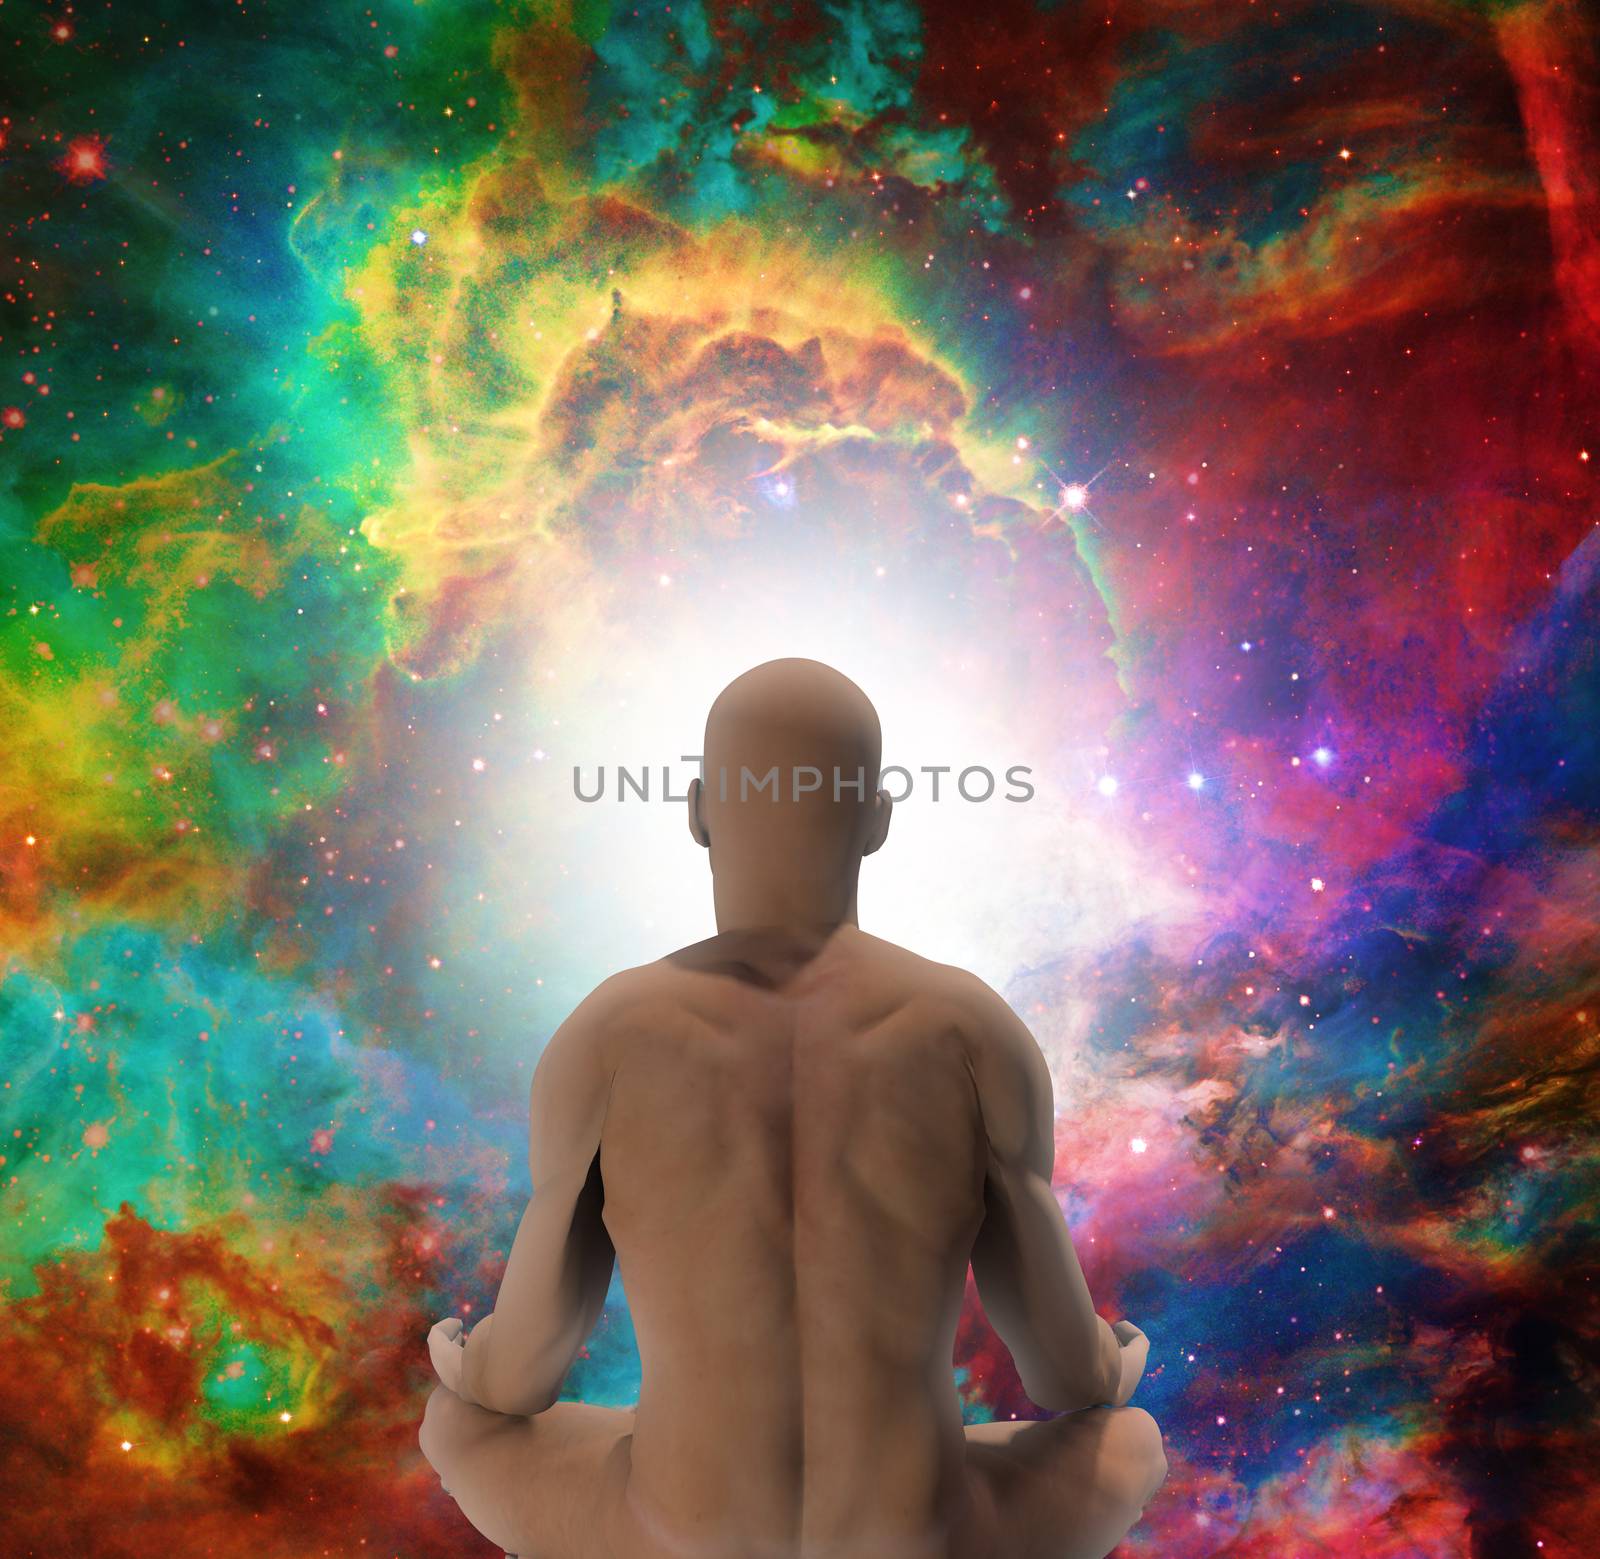 Meditation. Man in lotus position sits before endless spaces.